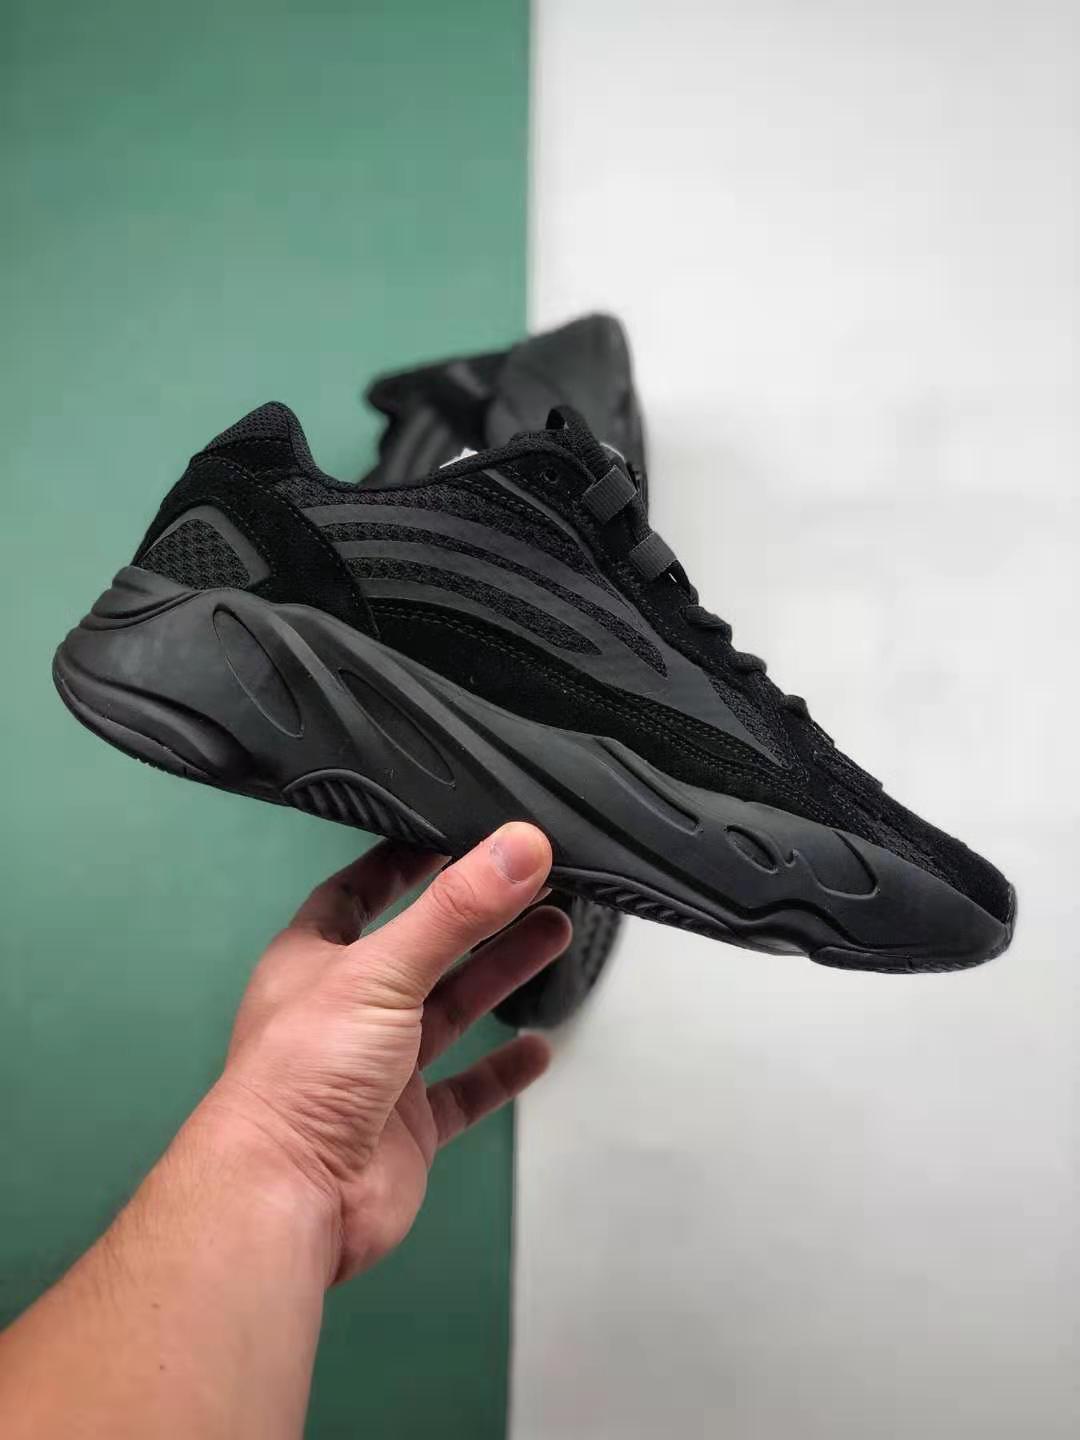 Adidas Yeezy Boost 700 V2 'Vanta' FU6684 - Shop Now & Elevate Your Style